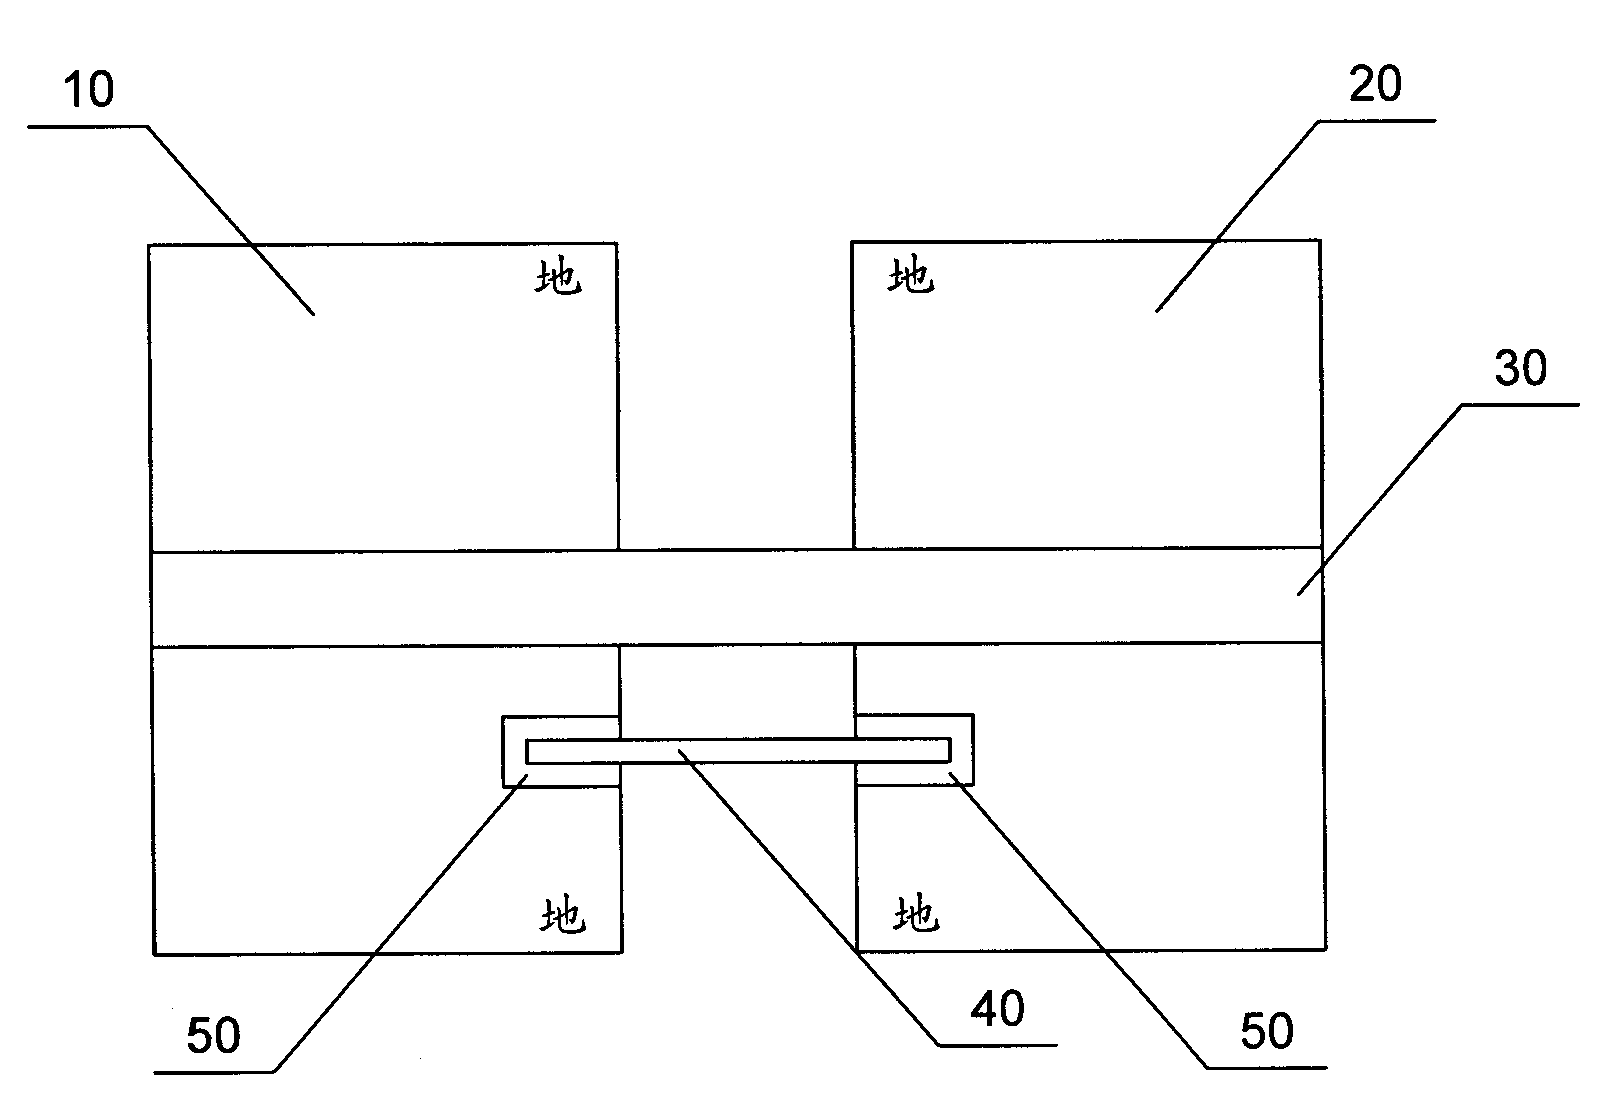 Circuit board interconnecting device